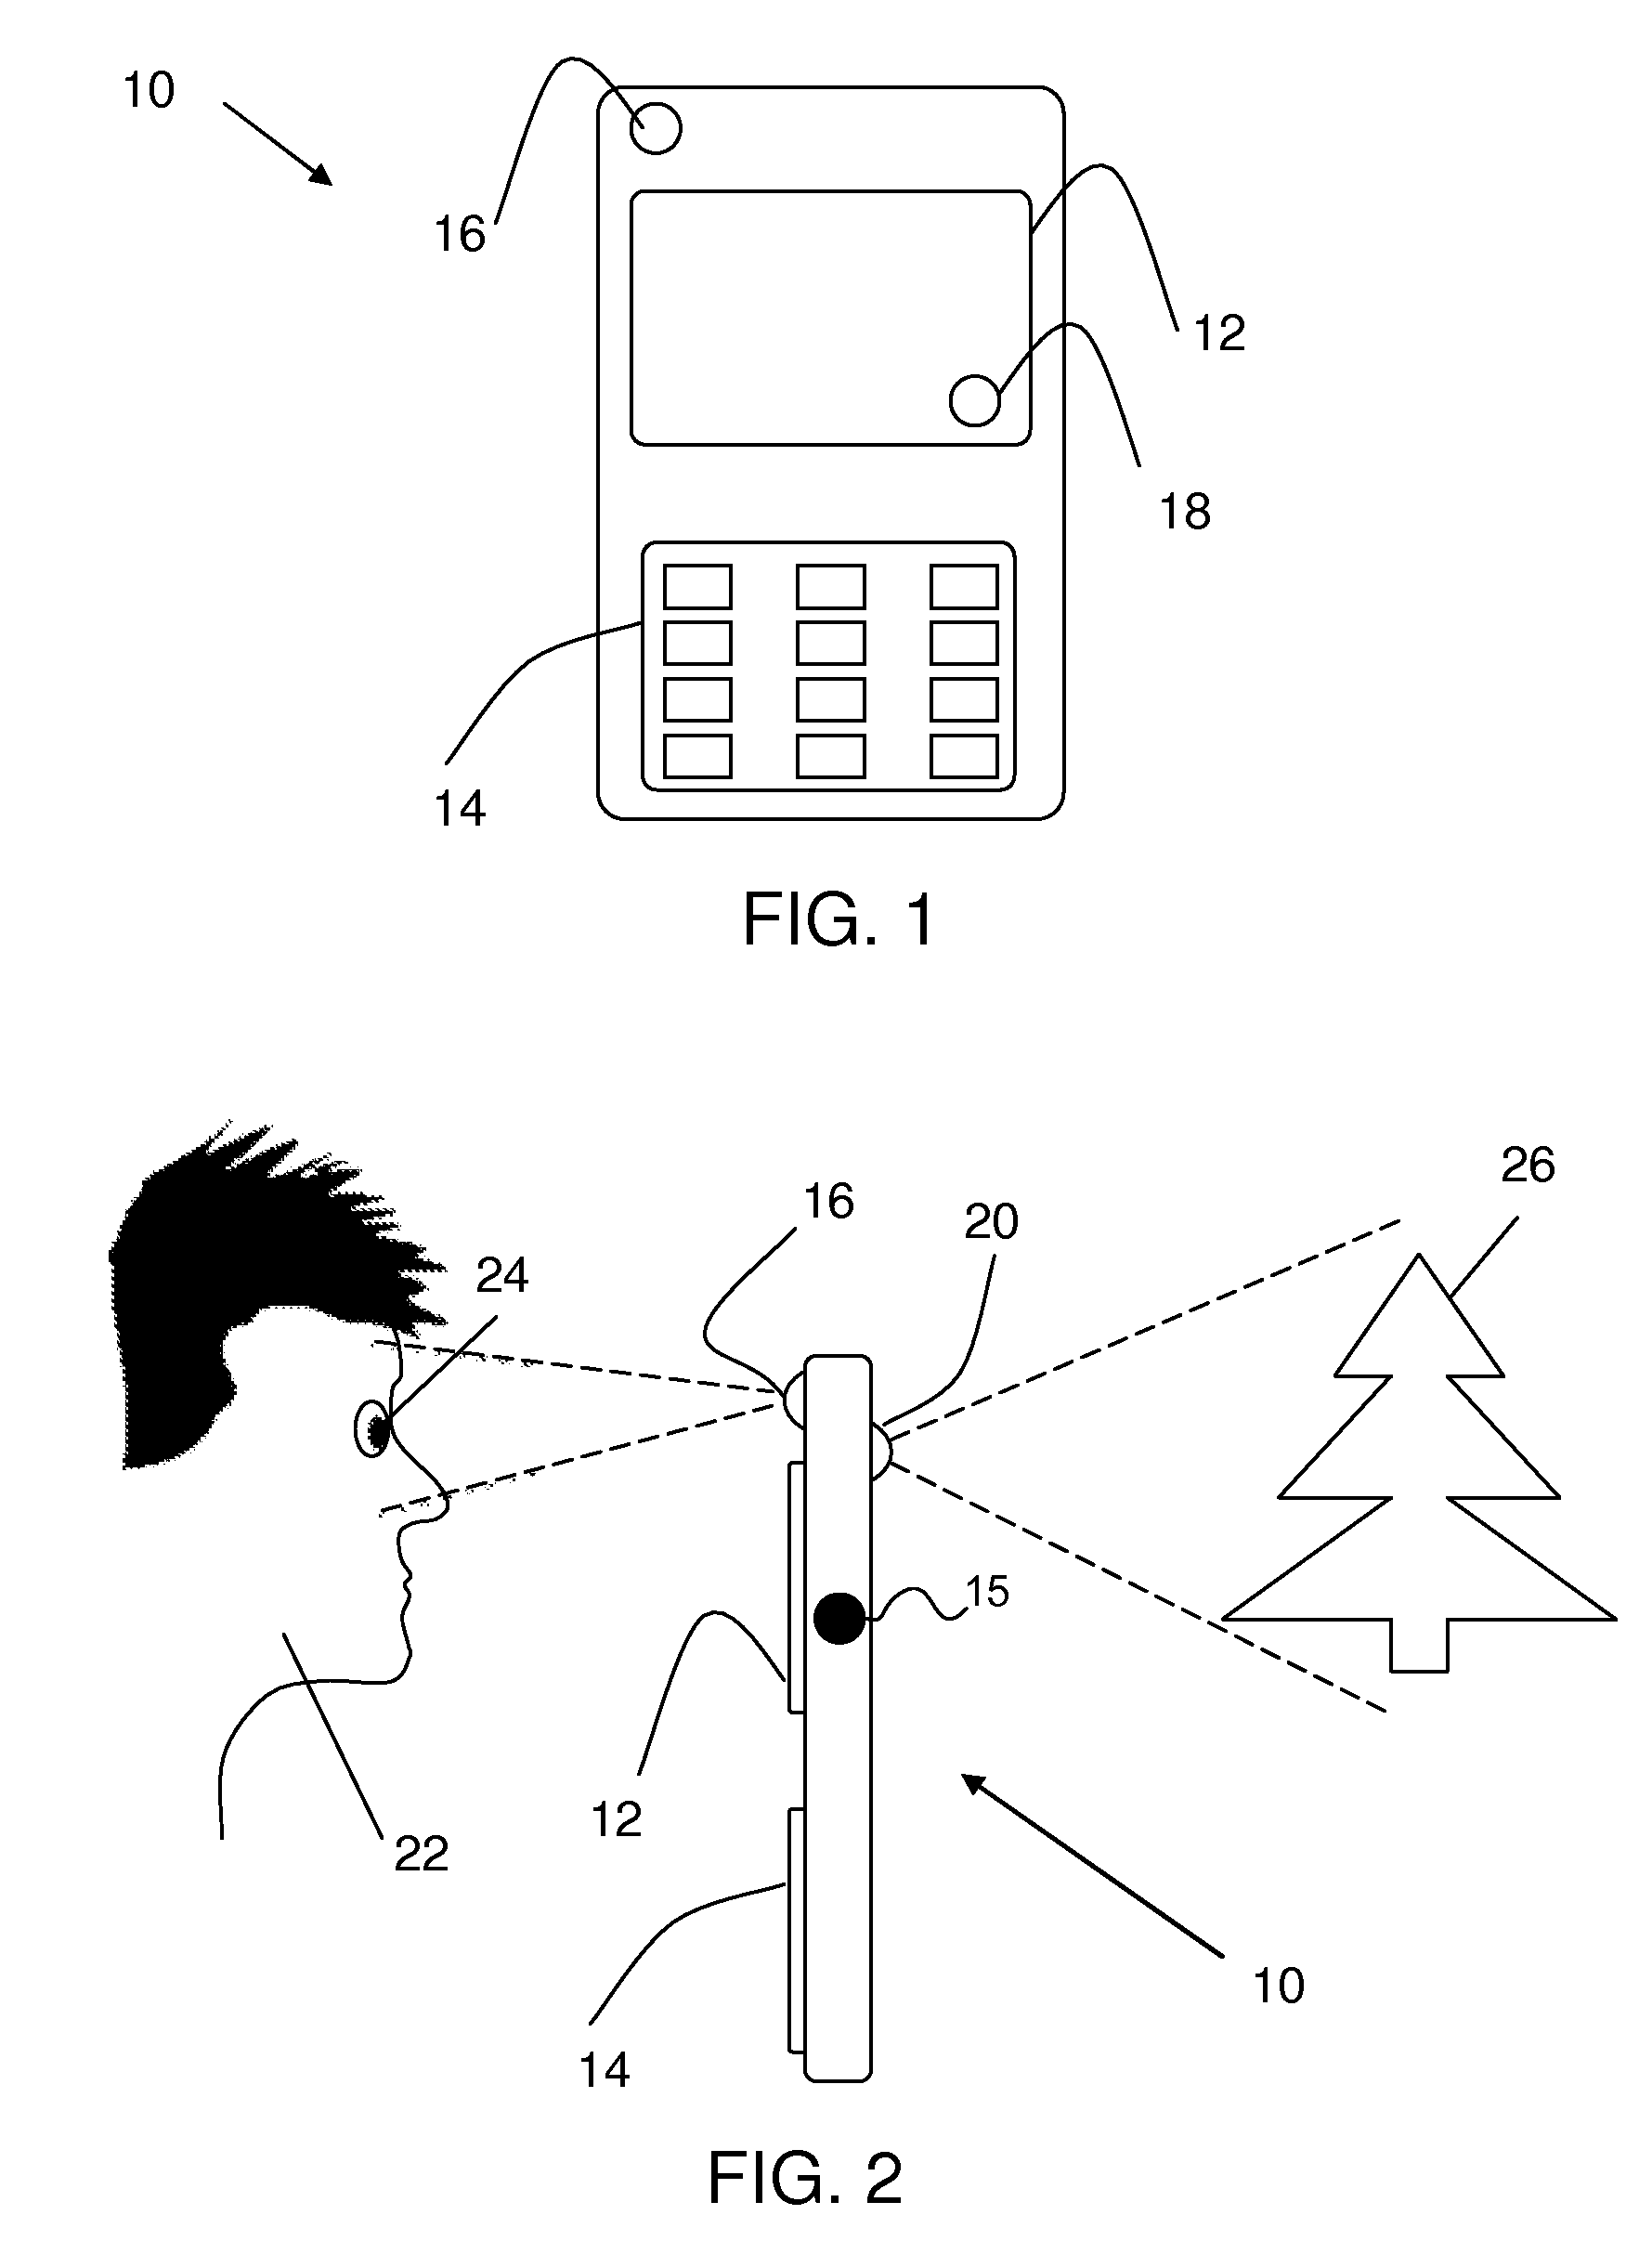 Remote control of an image capturing unit in a portable electronic device